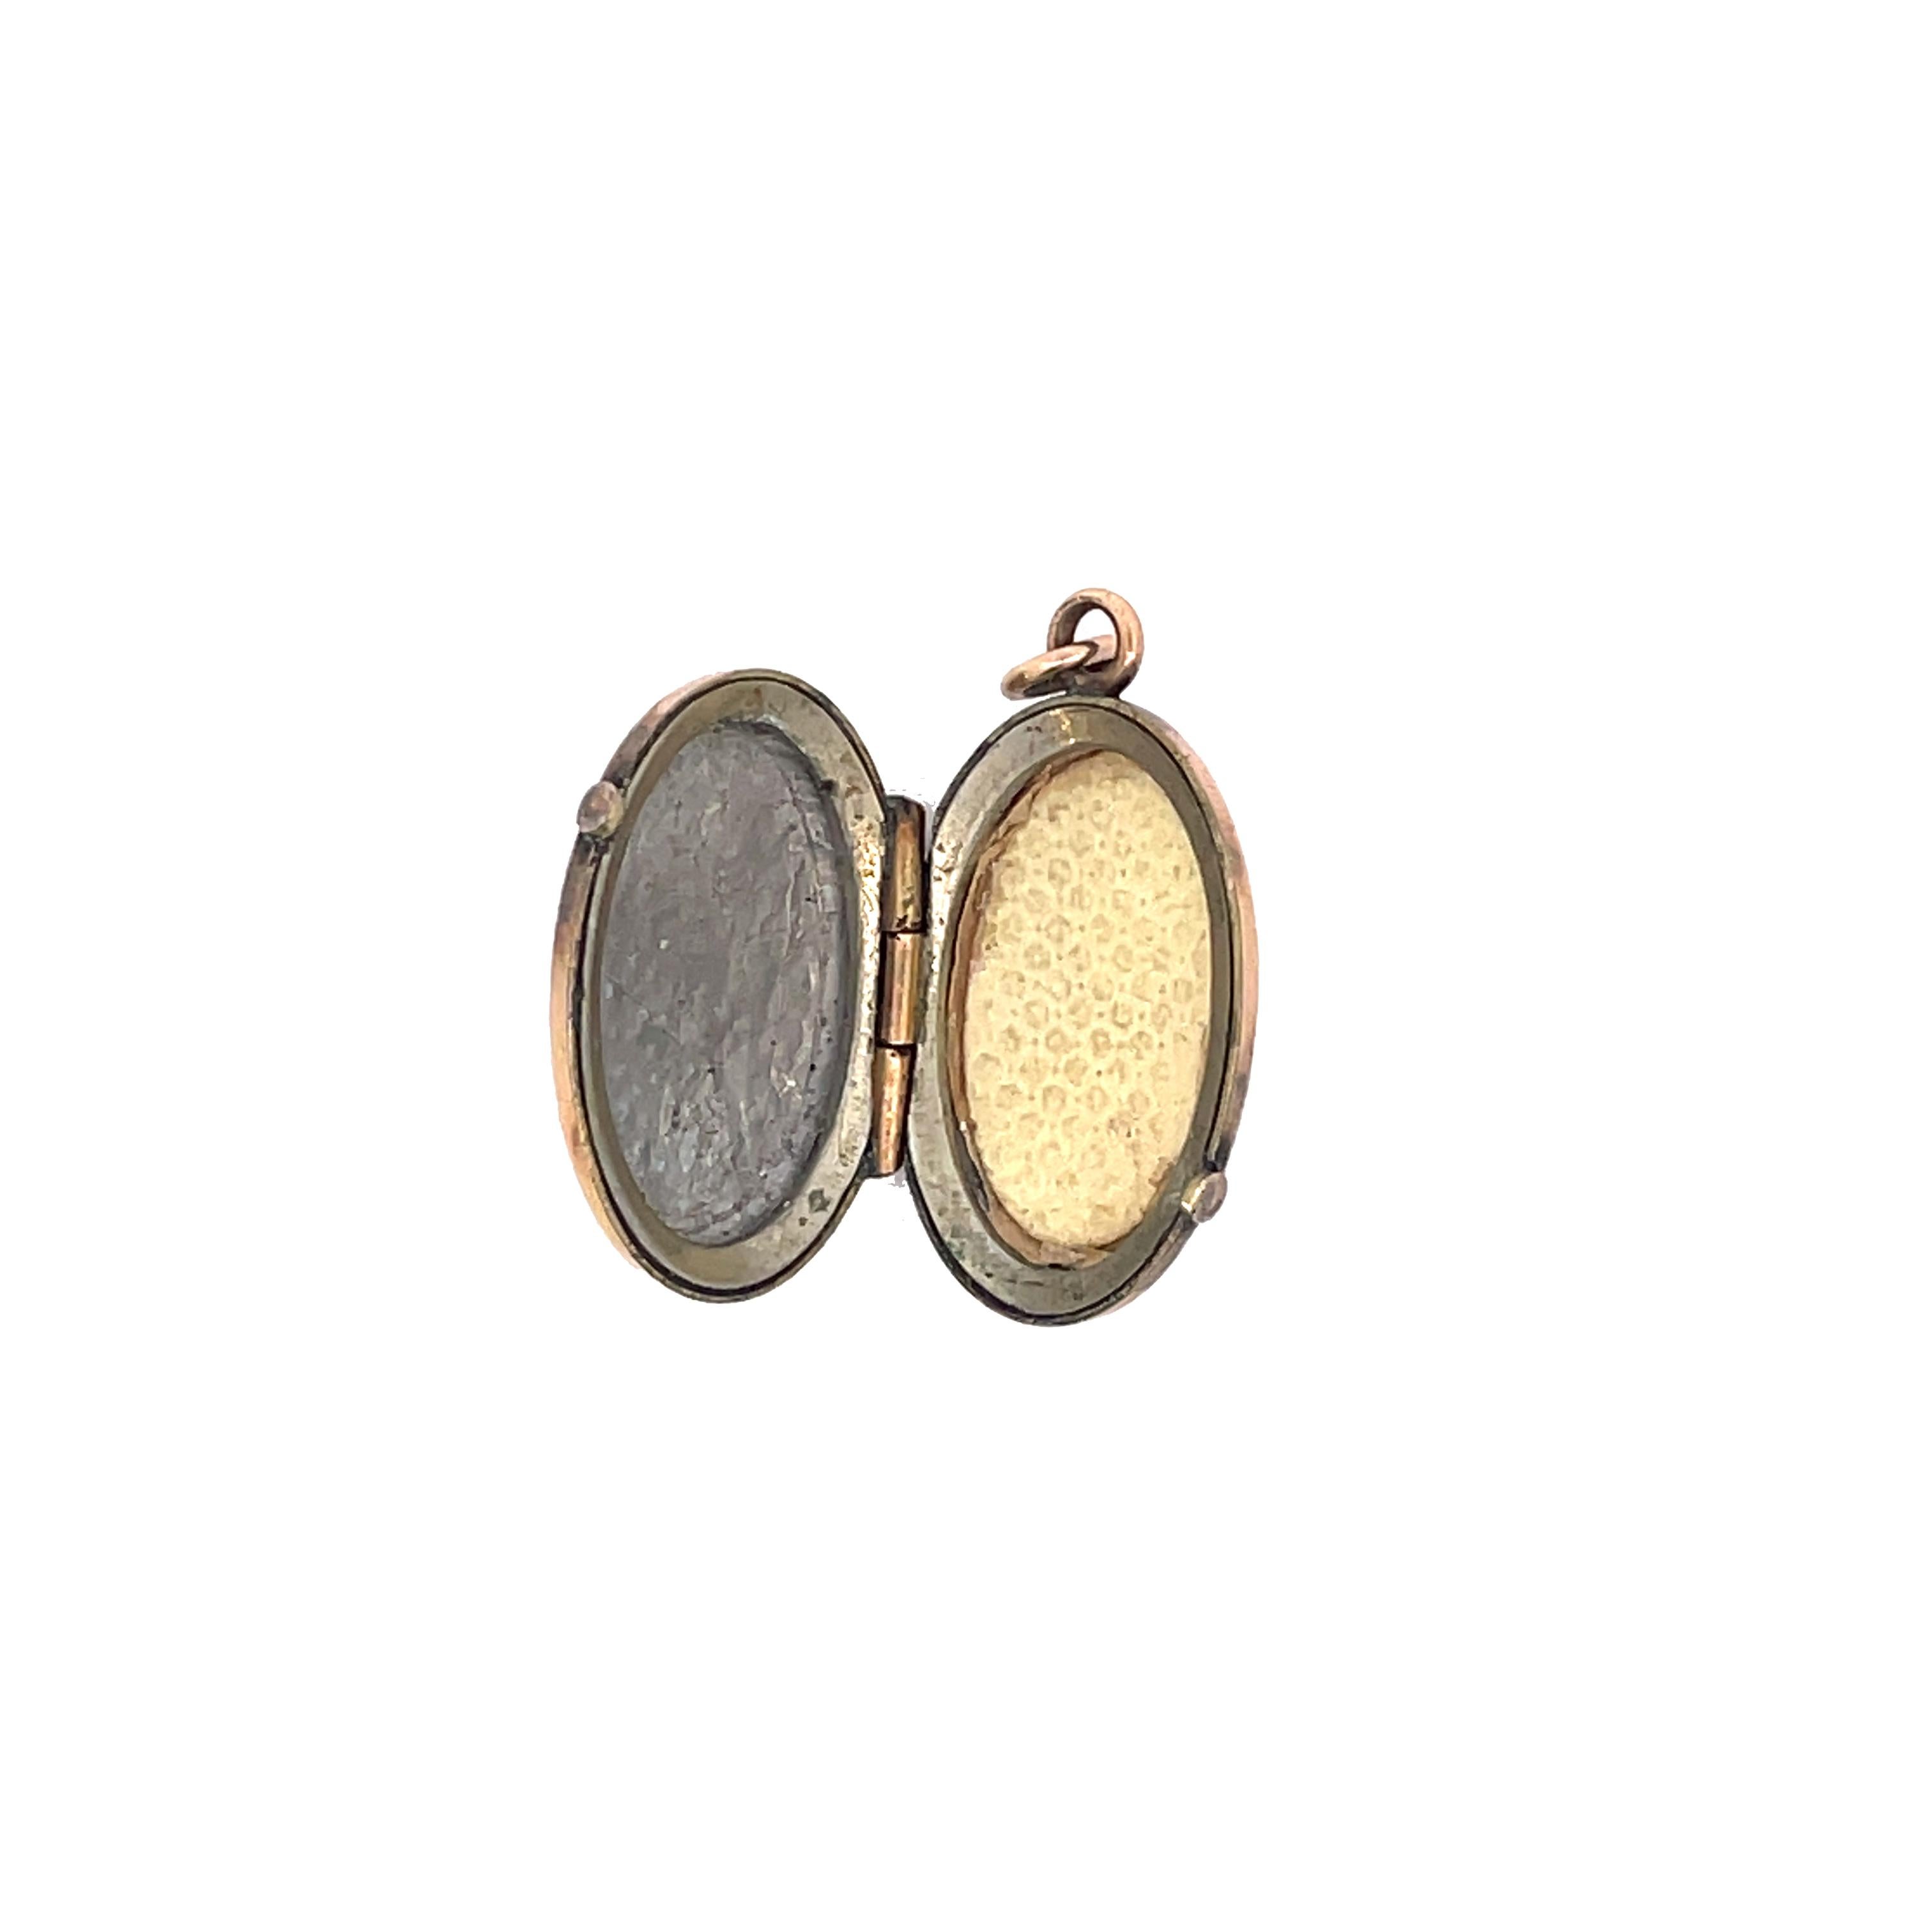 1890 Etruscan Engraved Gold Locket In Good Condition For Sale In Lexington, KY